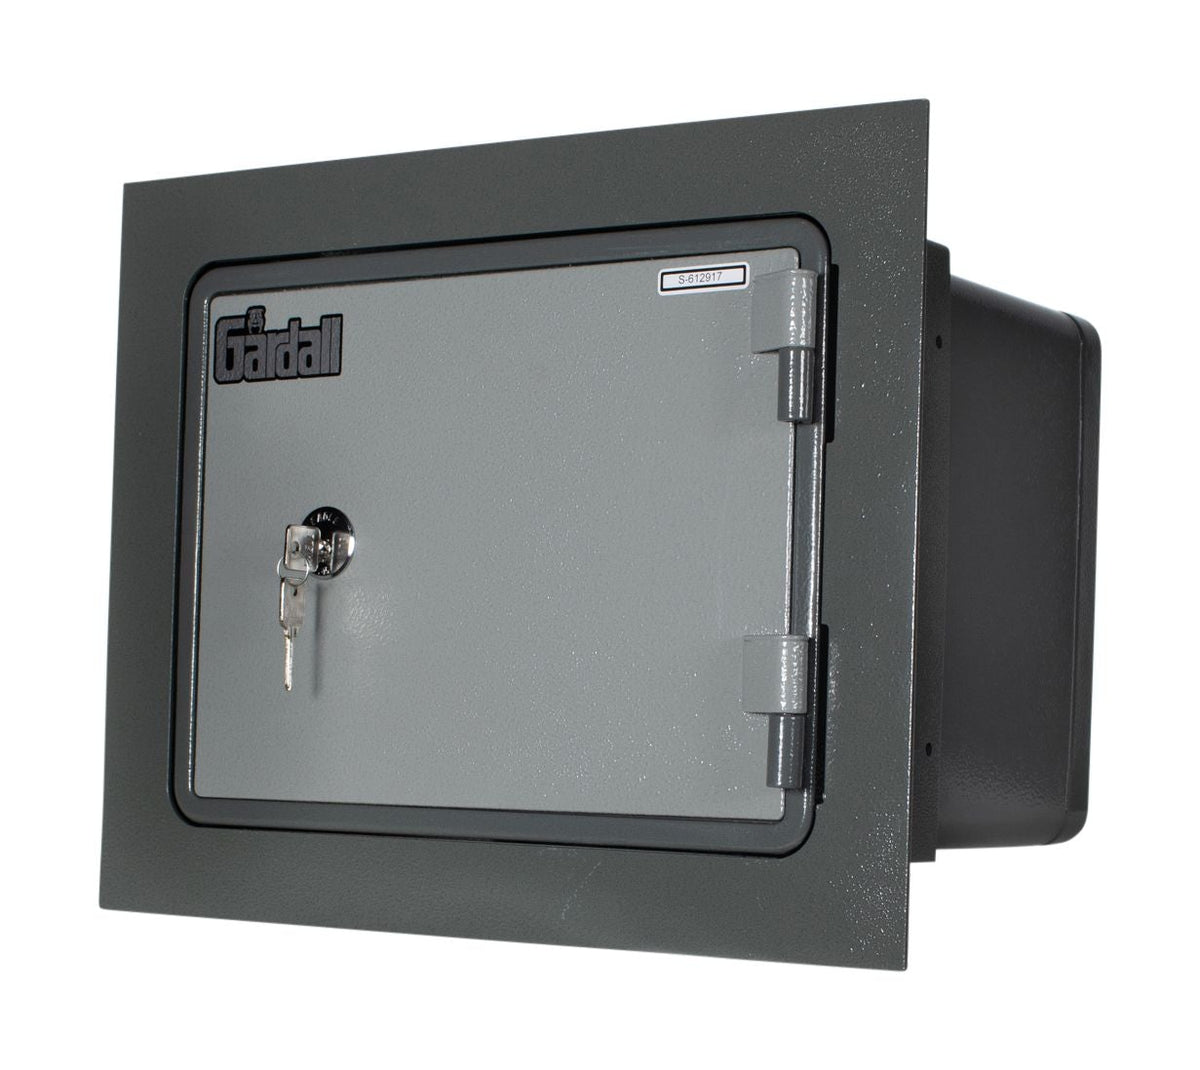 Gardall WMS911-G-K Fireproof Wall Safe (with flange) with Key Lock